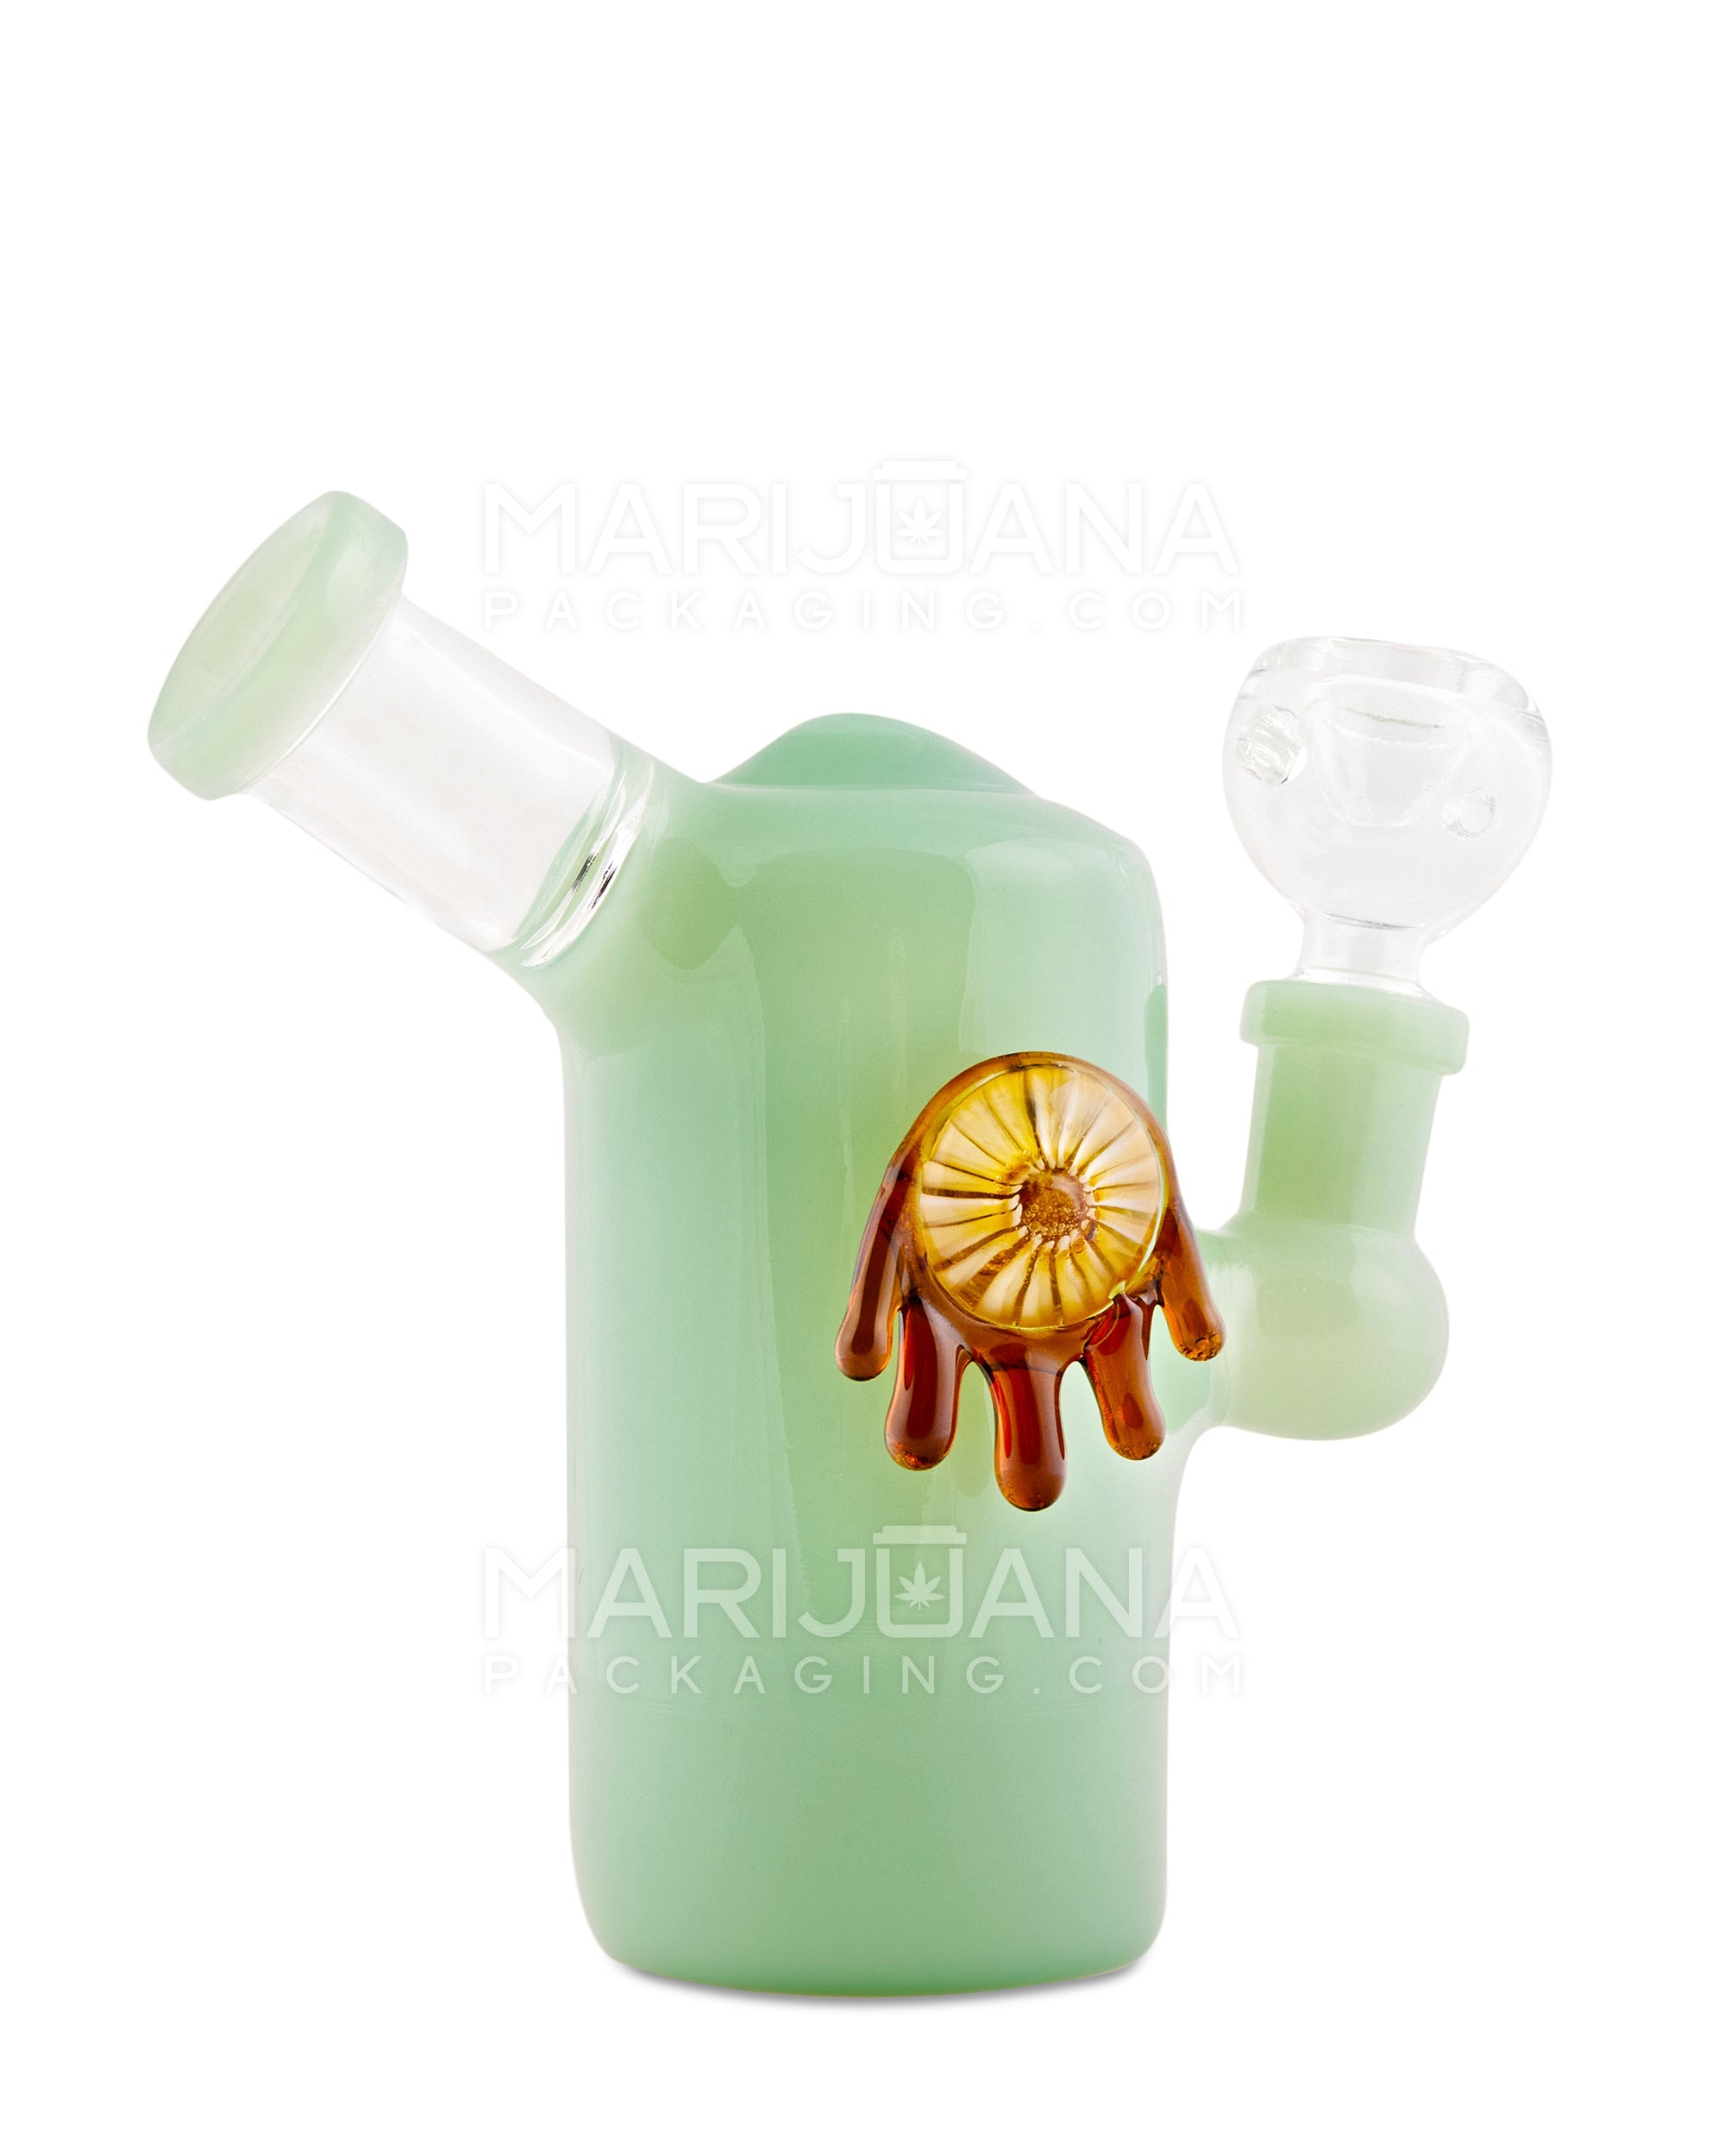 Glass Water Pipes & Bongs for Smoking - Shop Bongs on Sale –